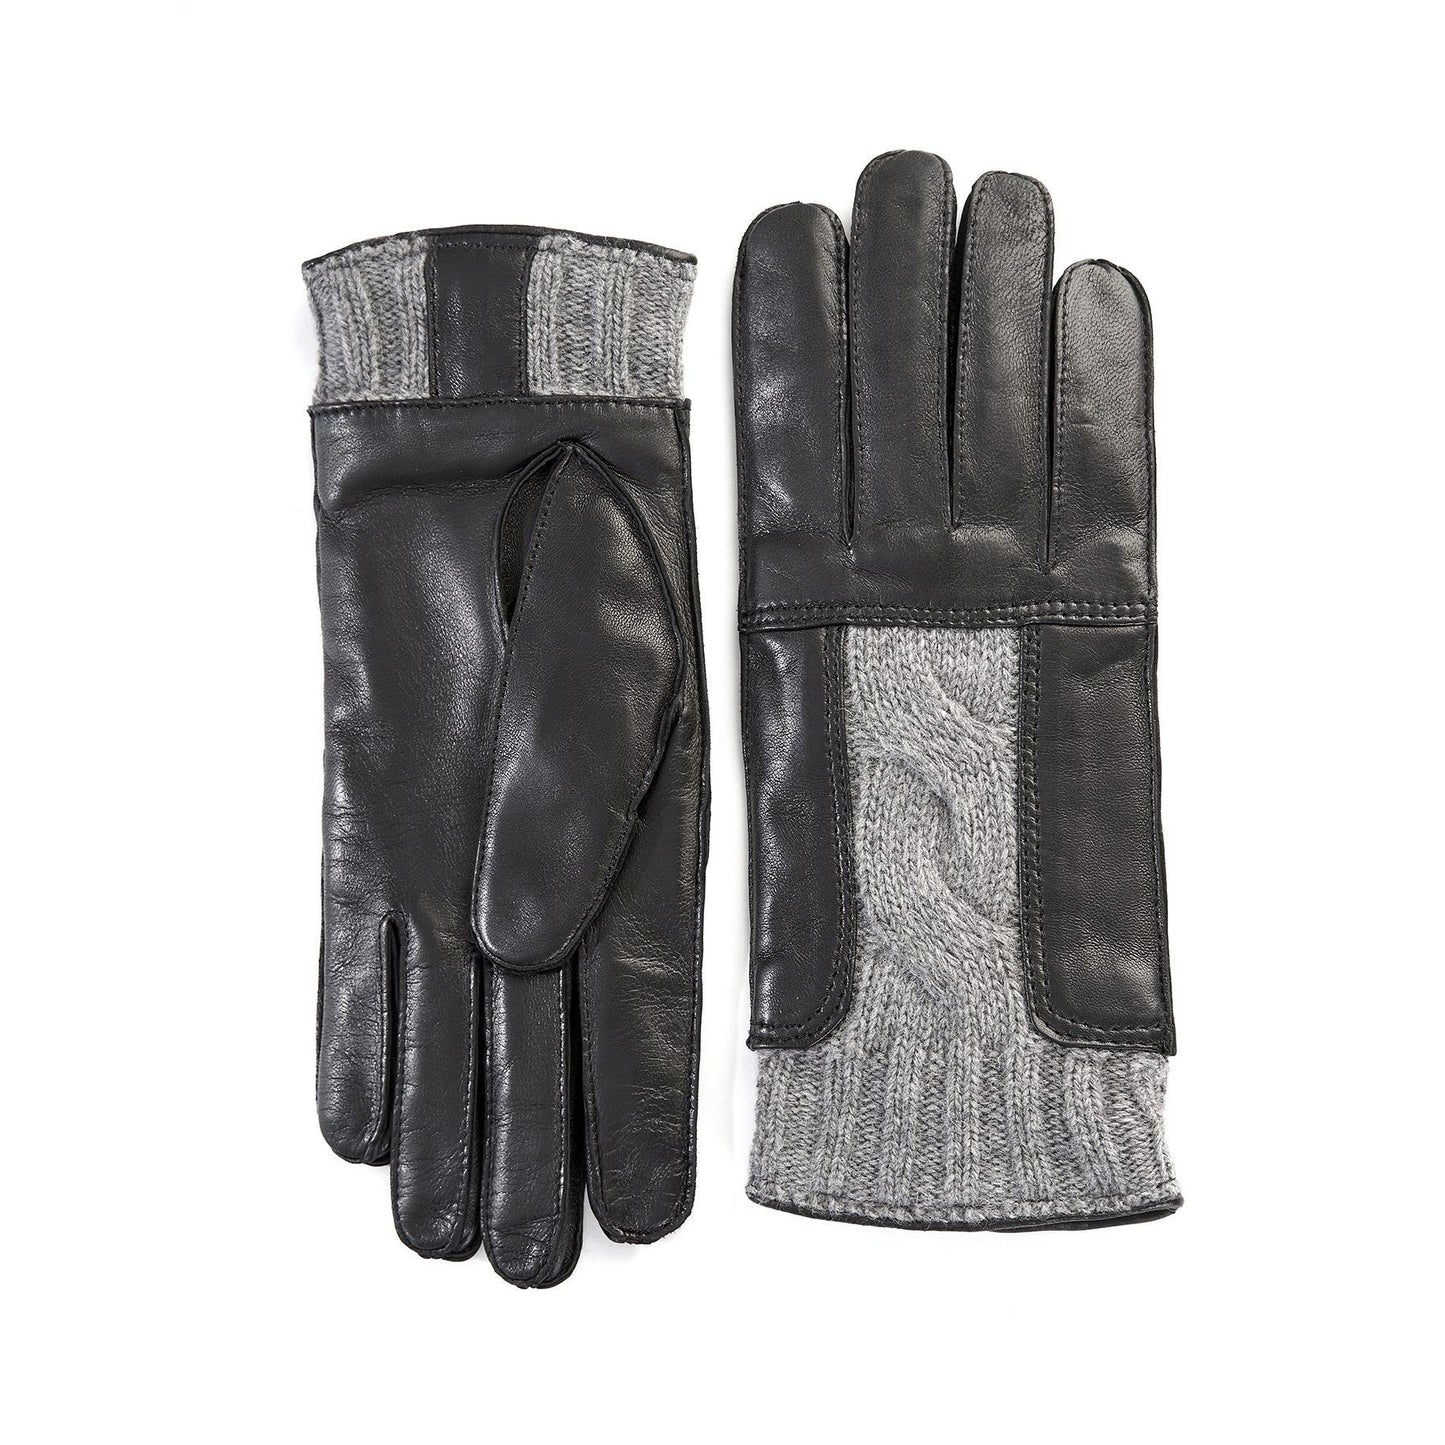 Men's leather gloves in color black with grey woven wool insert on top